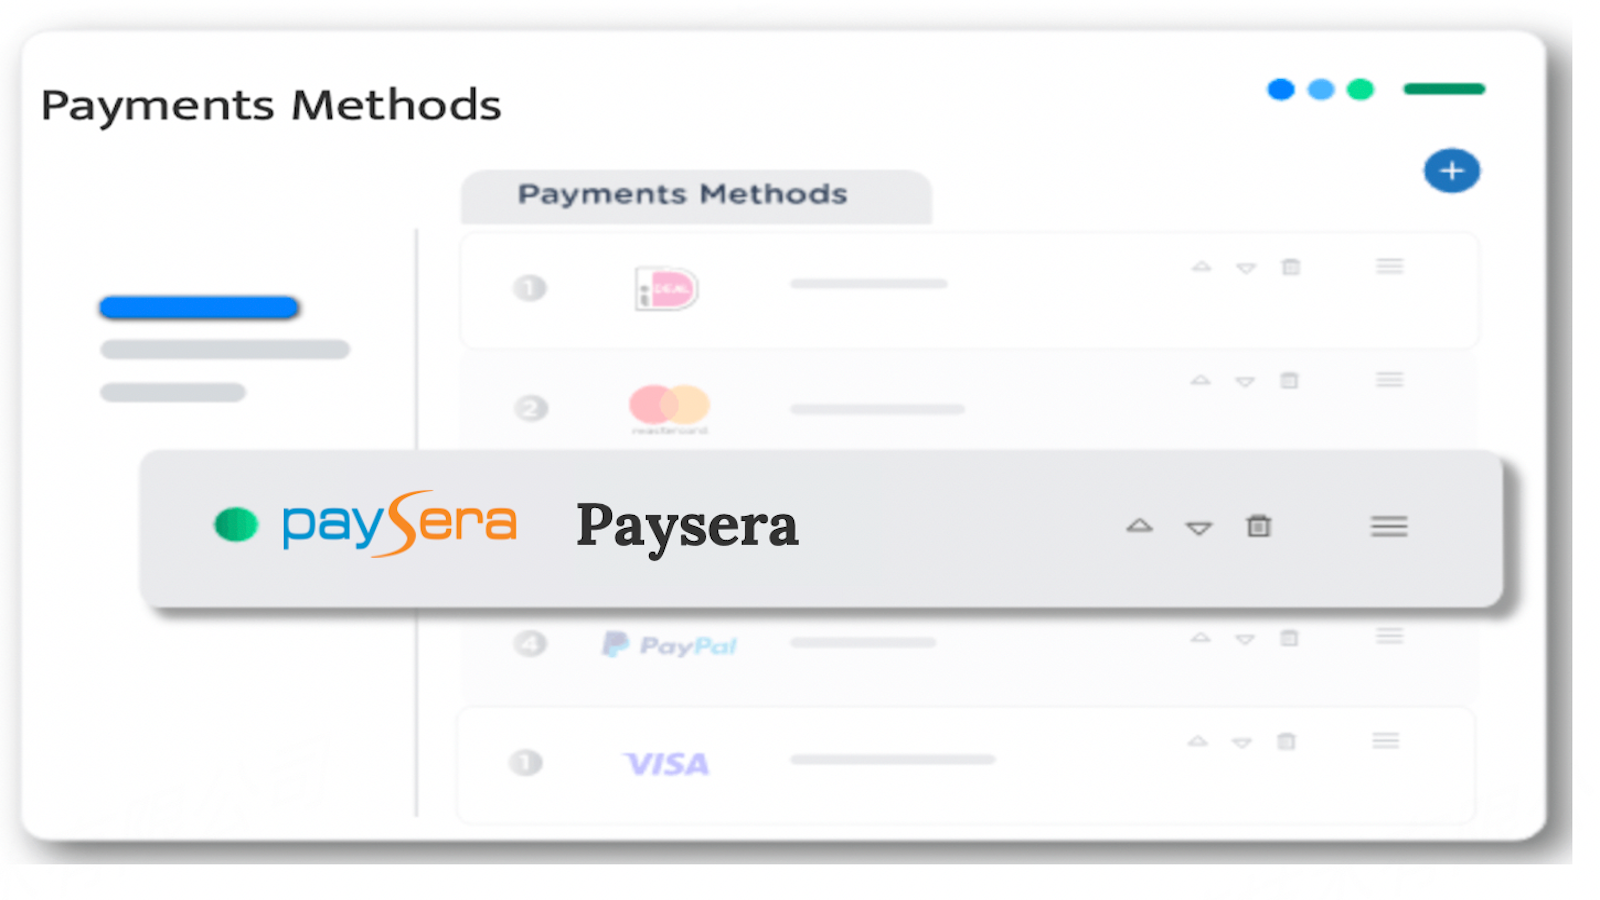 Using Paysera as payment method